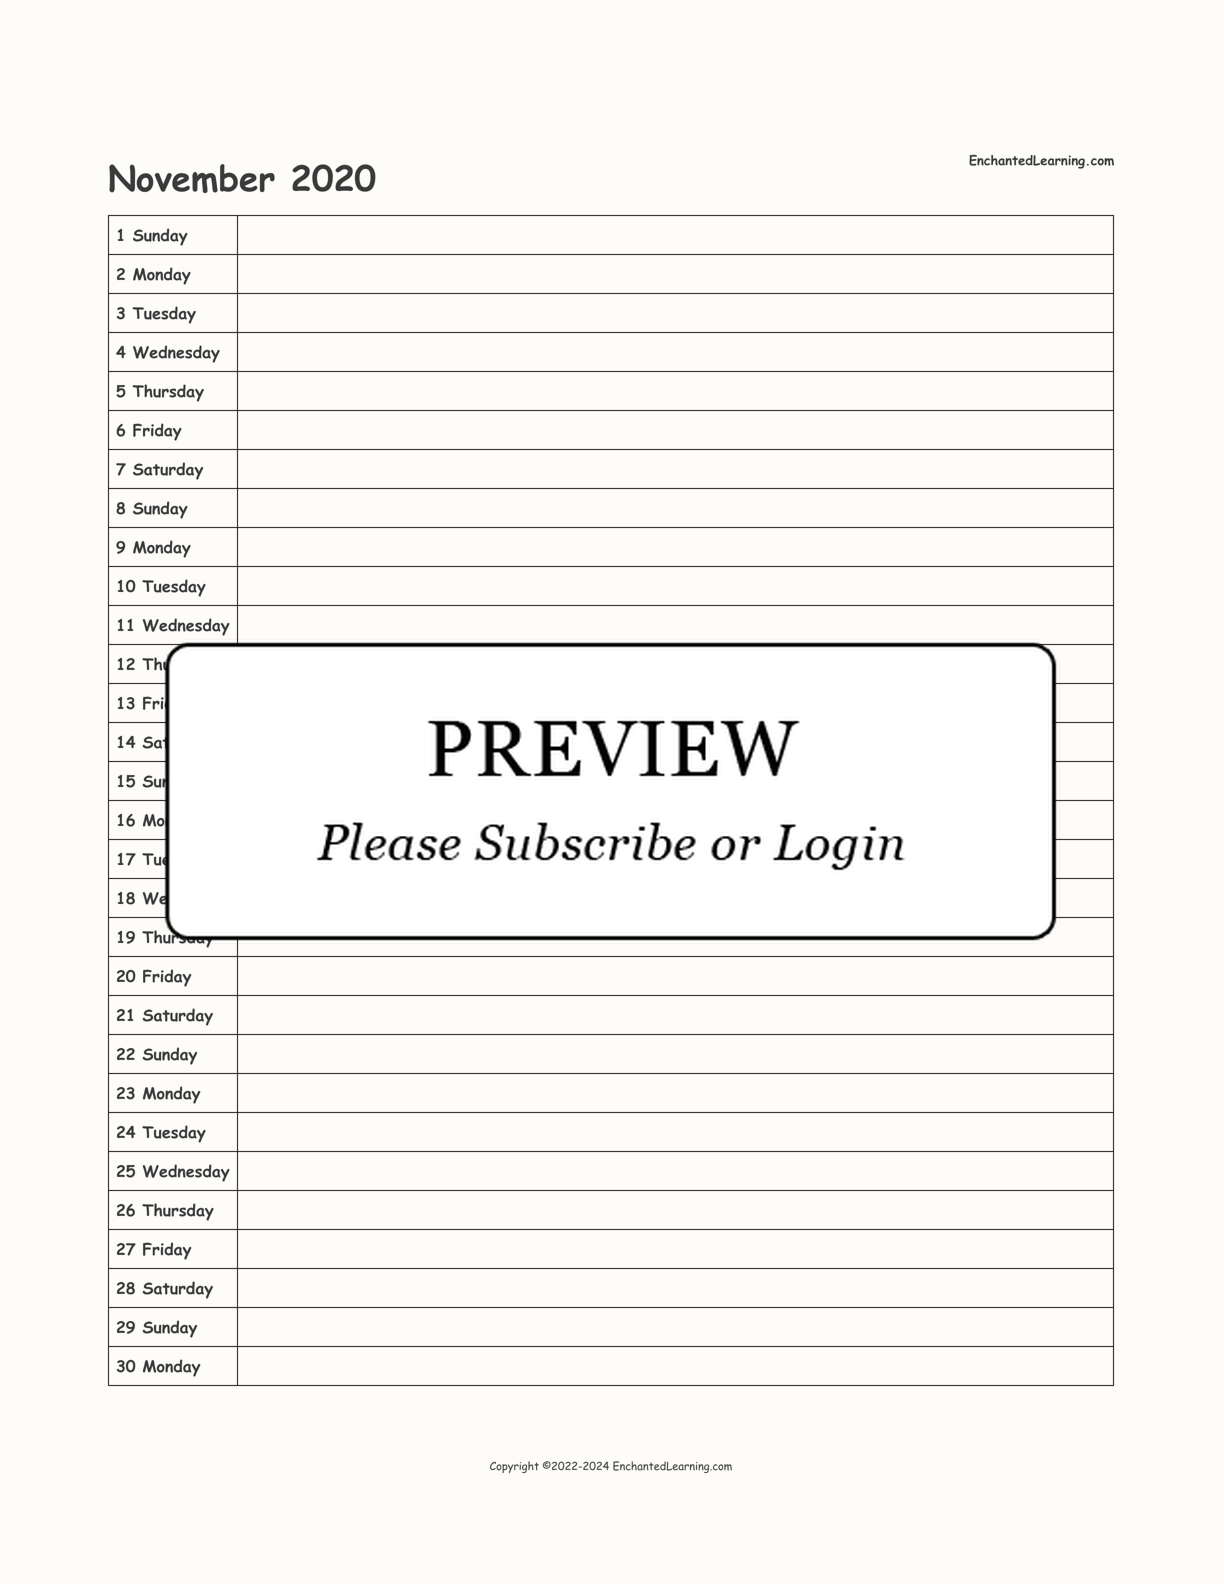 2020 Scheduling Calendar interactive printout page 11